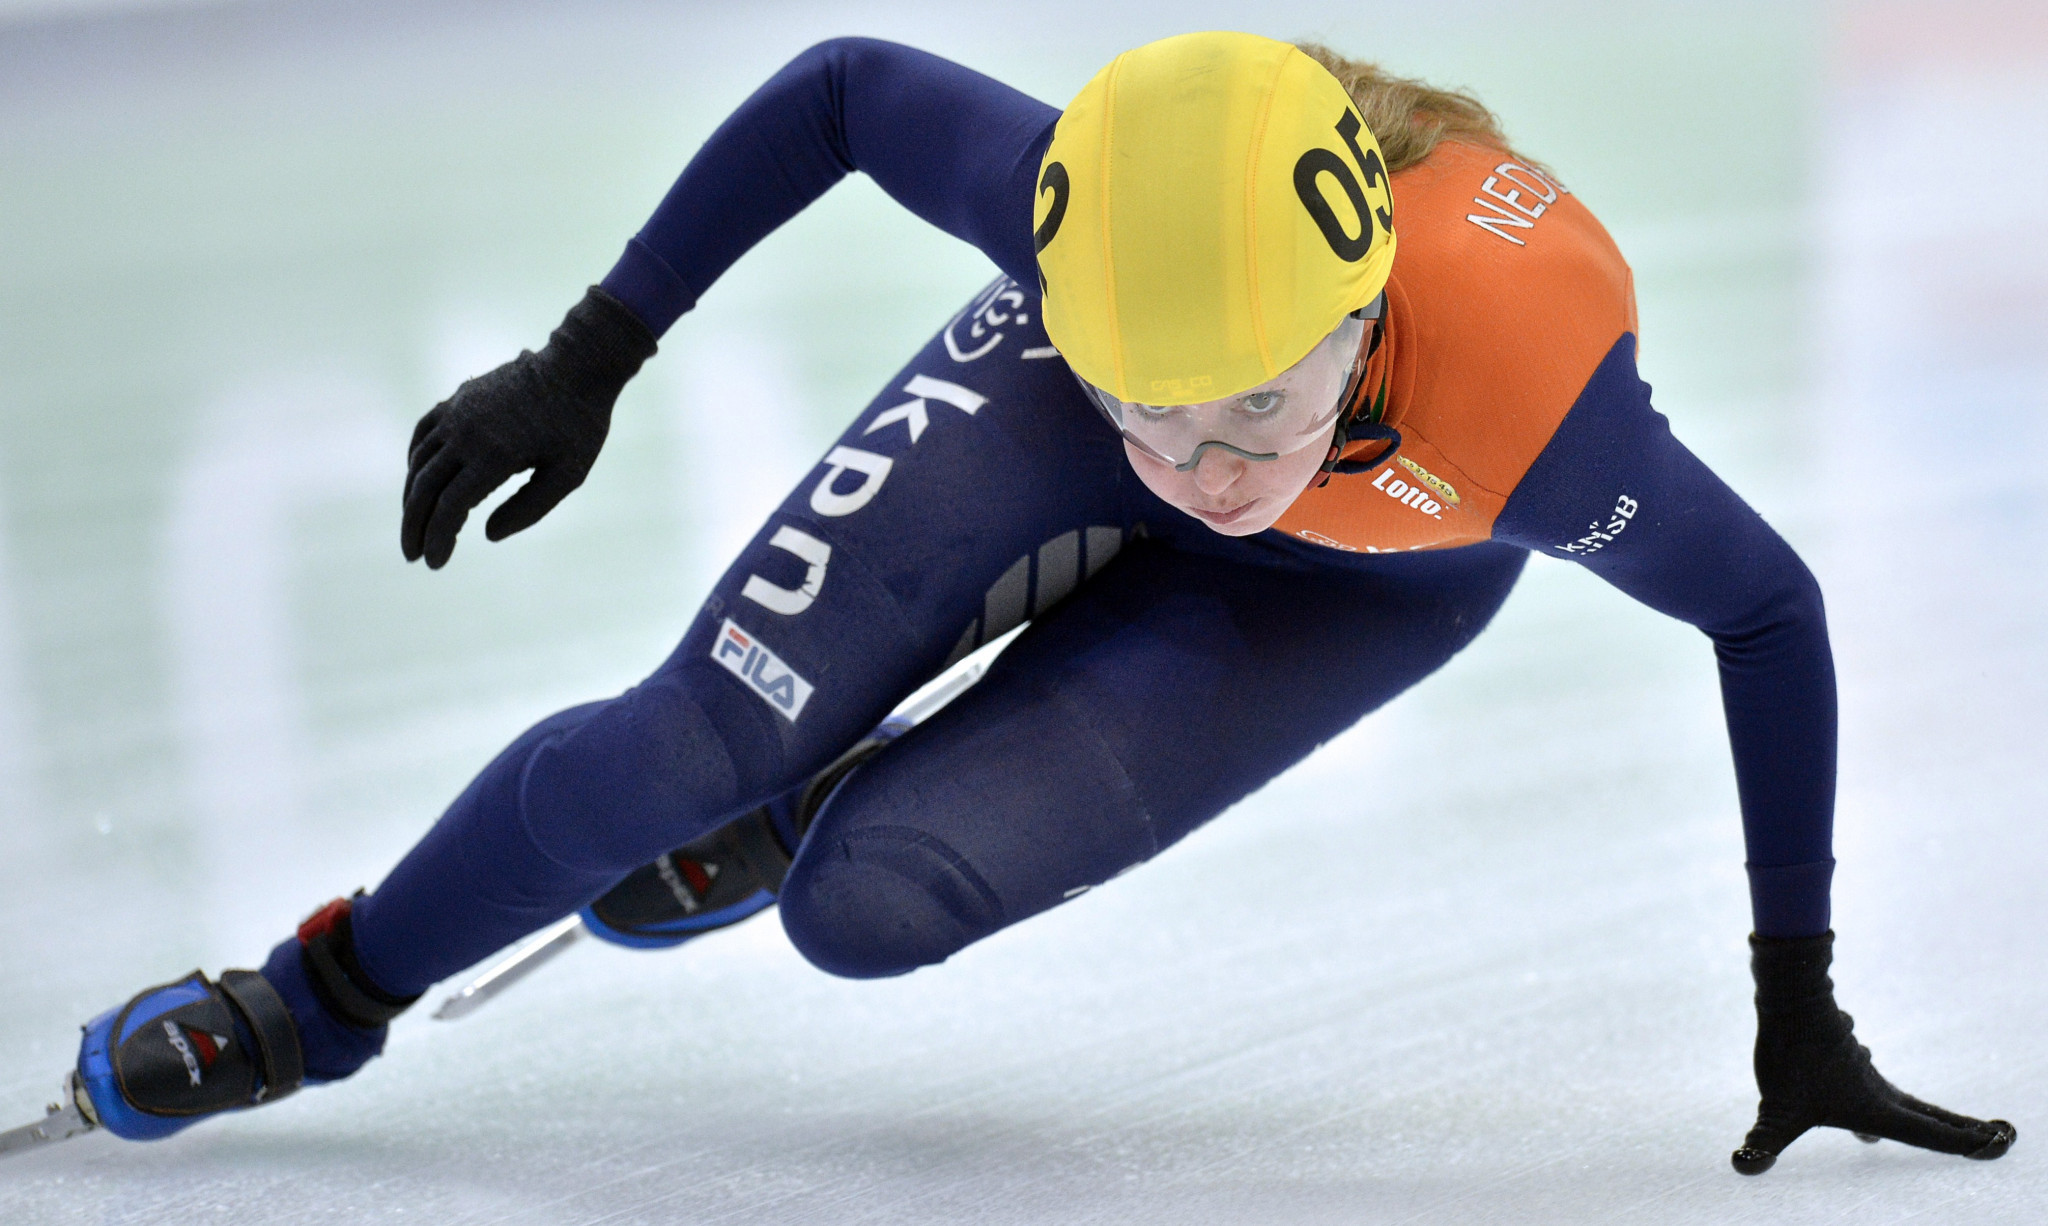 Lara van Ruijven is a world champion and Olympic medallist ©Getty Images